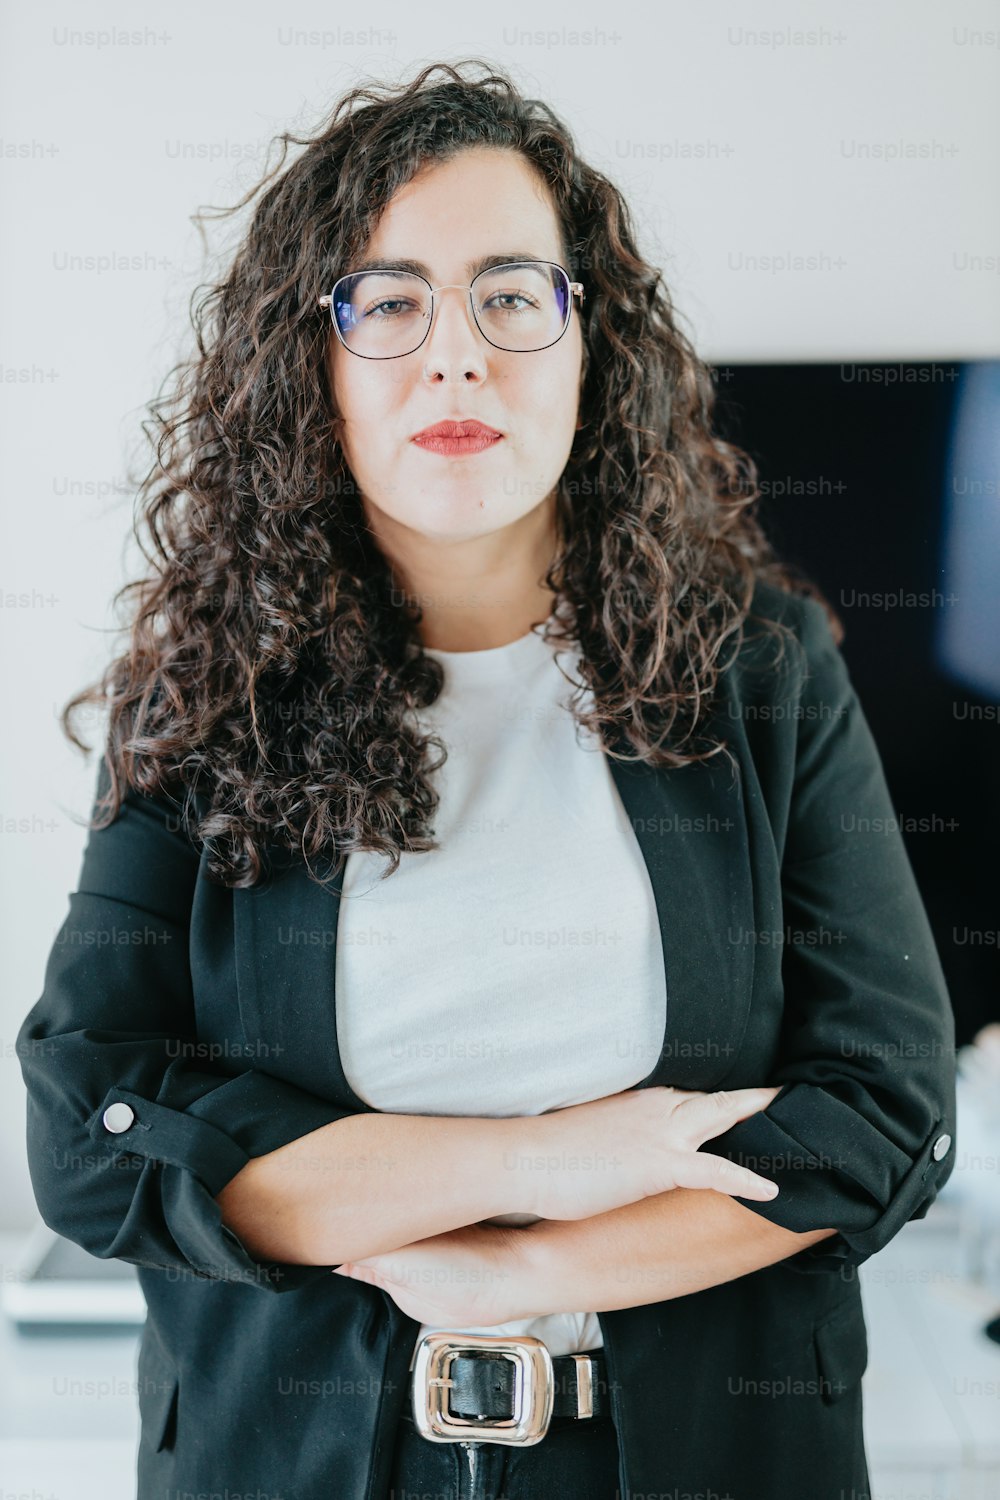 Premium Photo  A woman wearing glasses and a suit